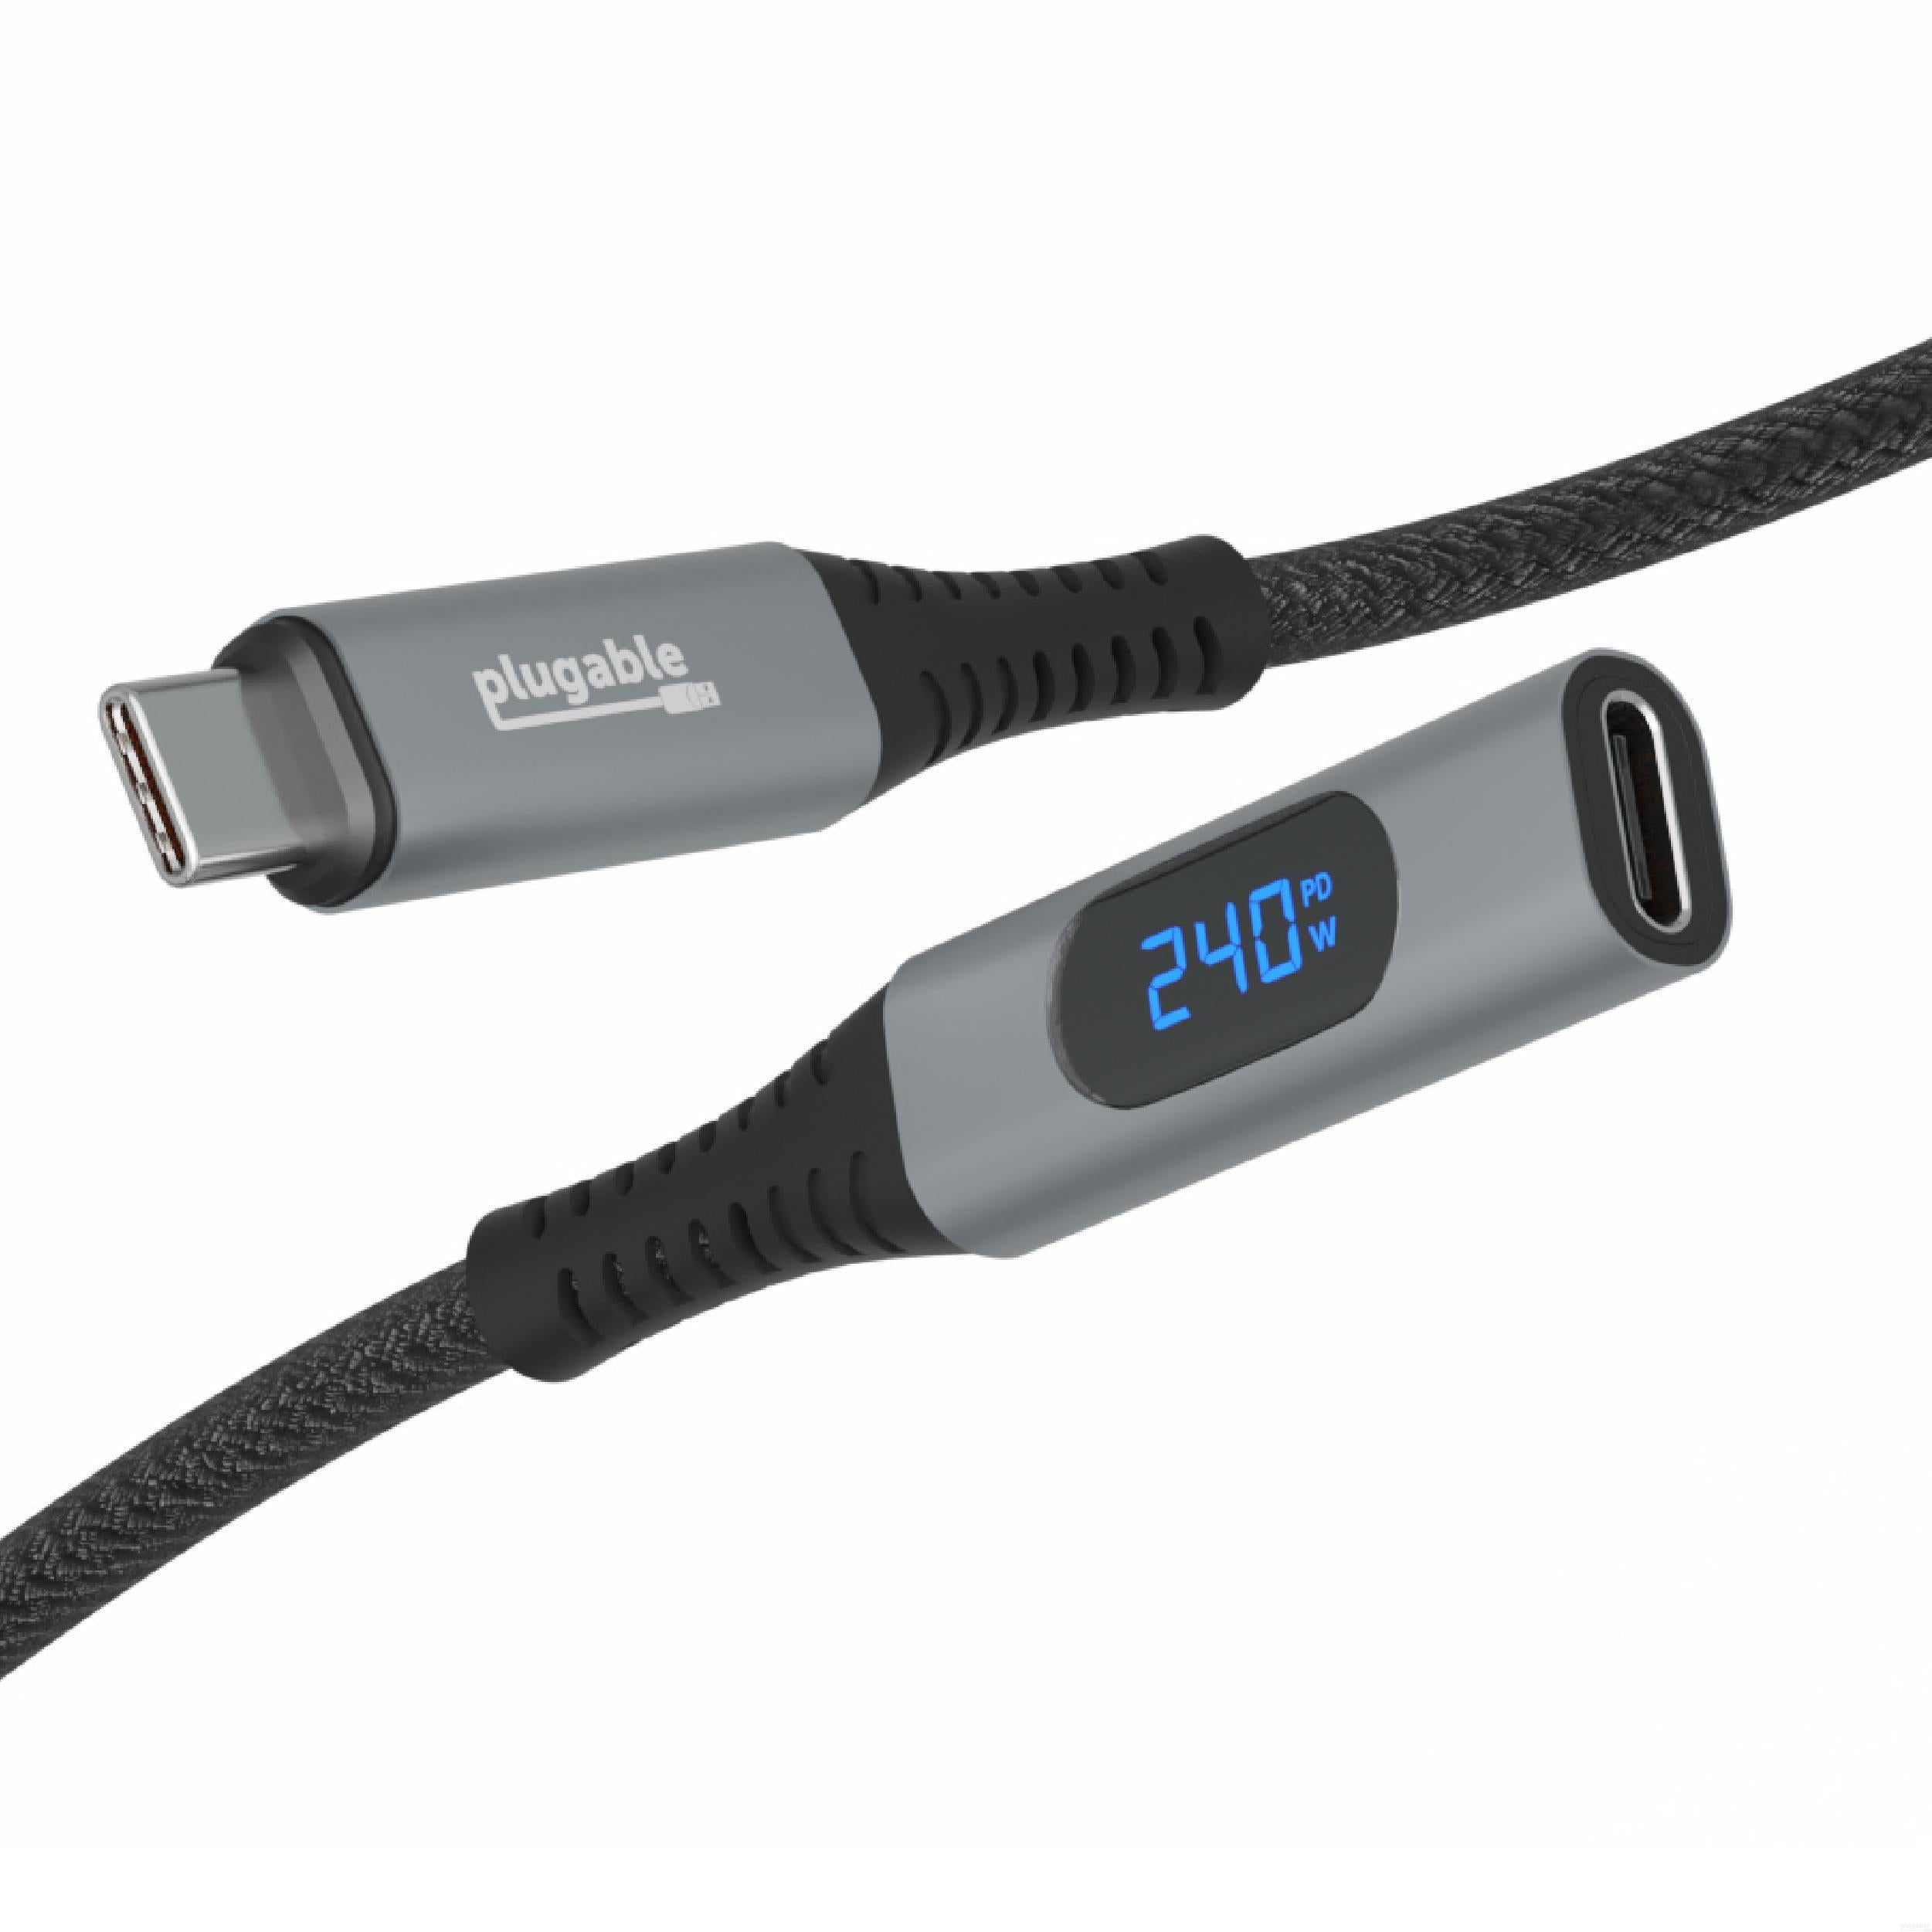 Plugable USB-C Extension Cable with Built-In Multimeter Tester